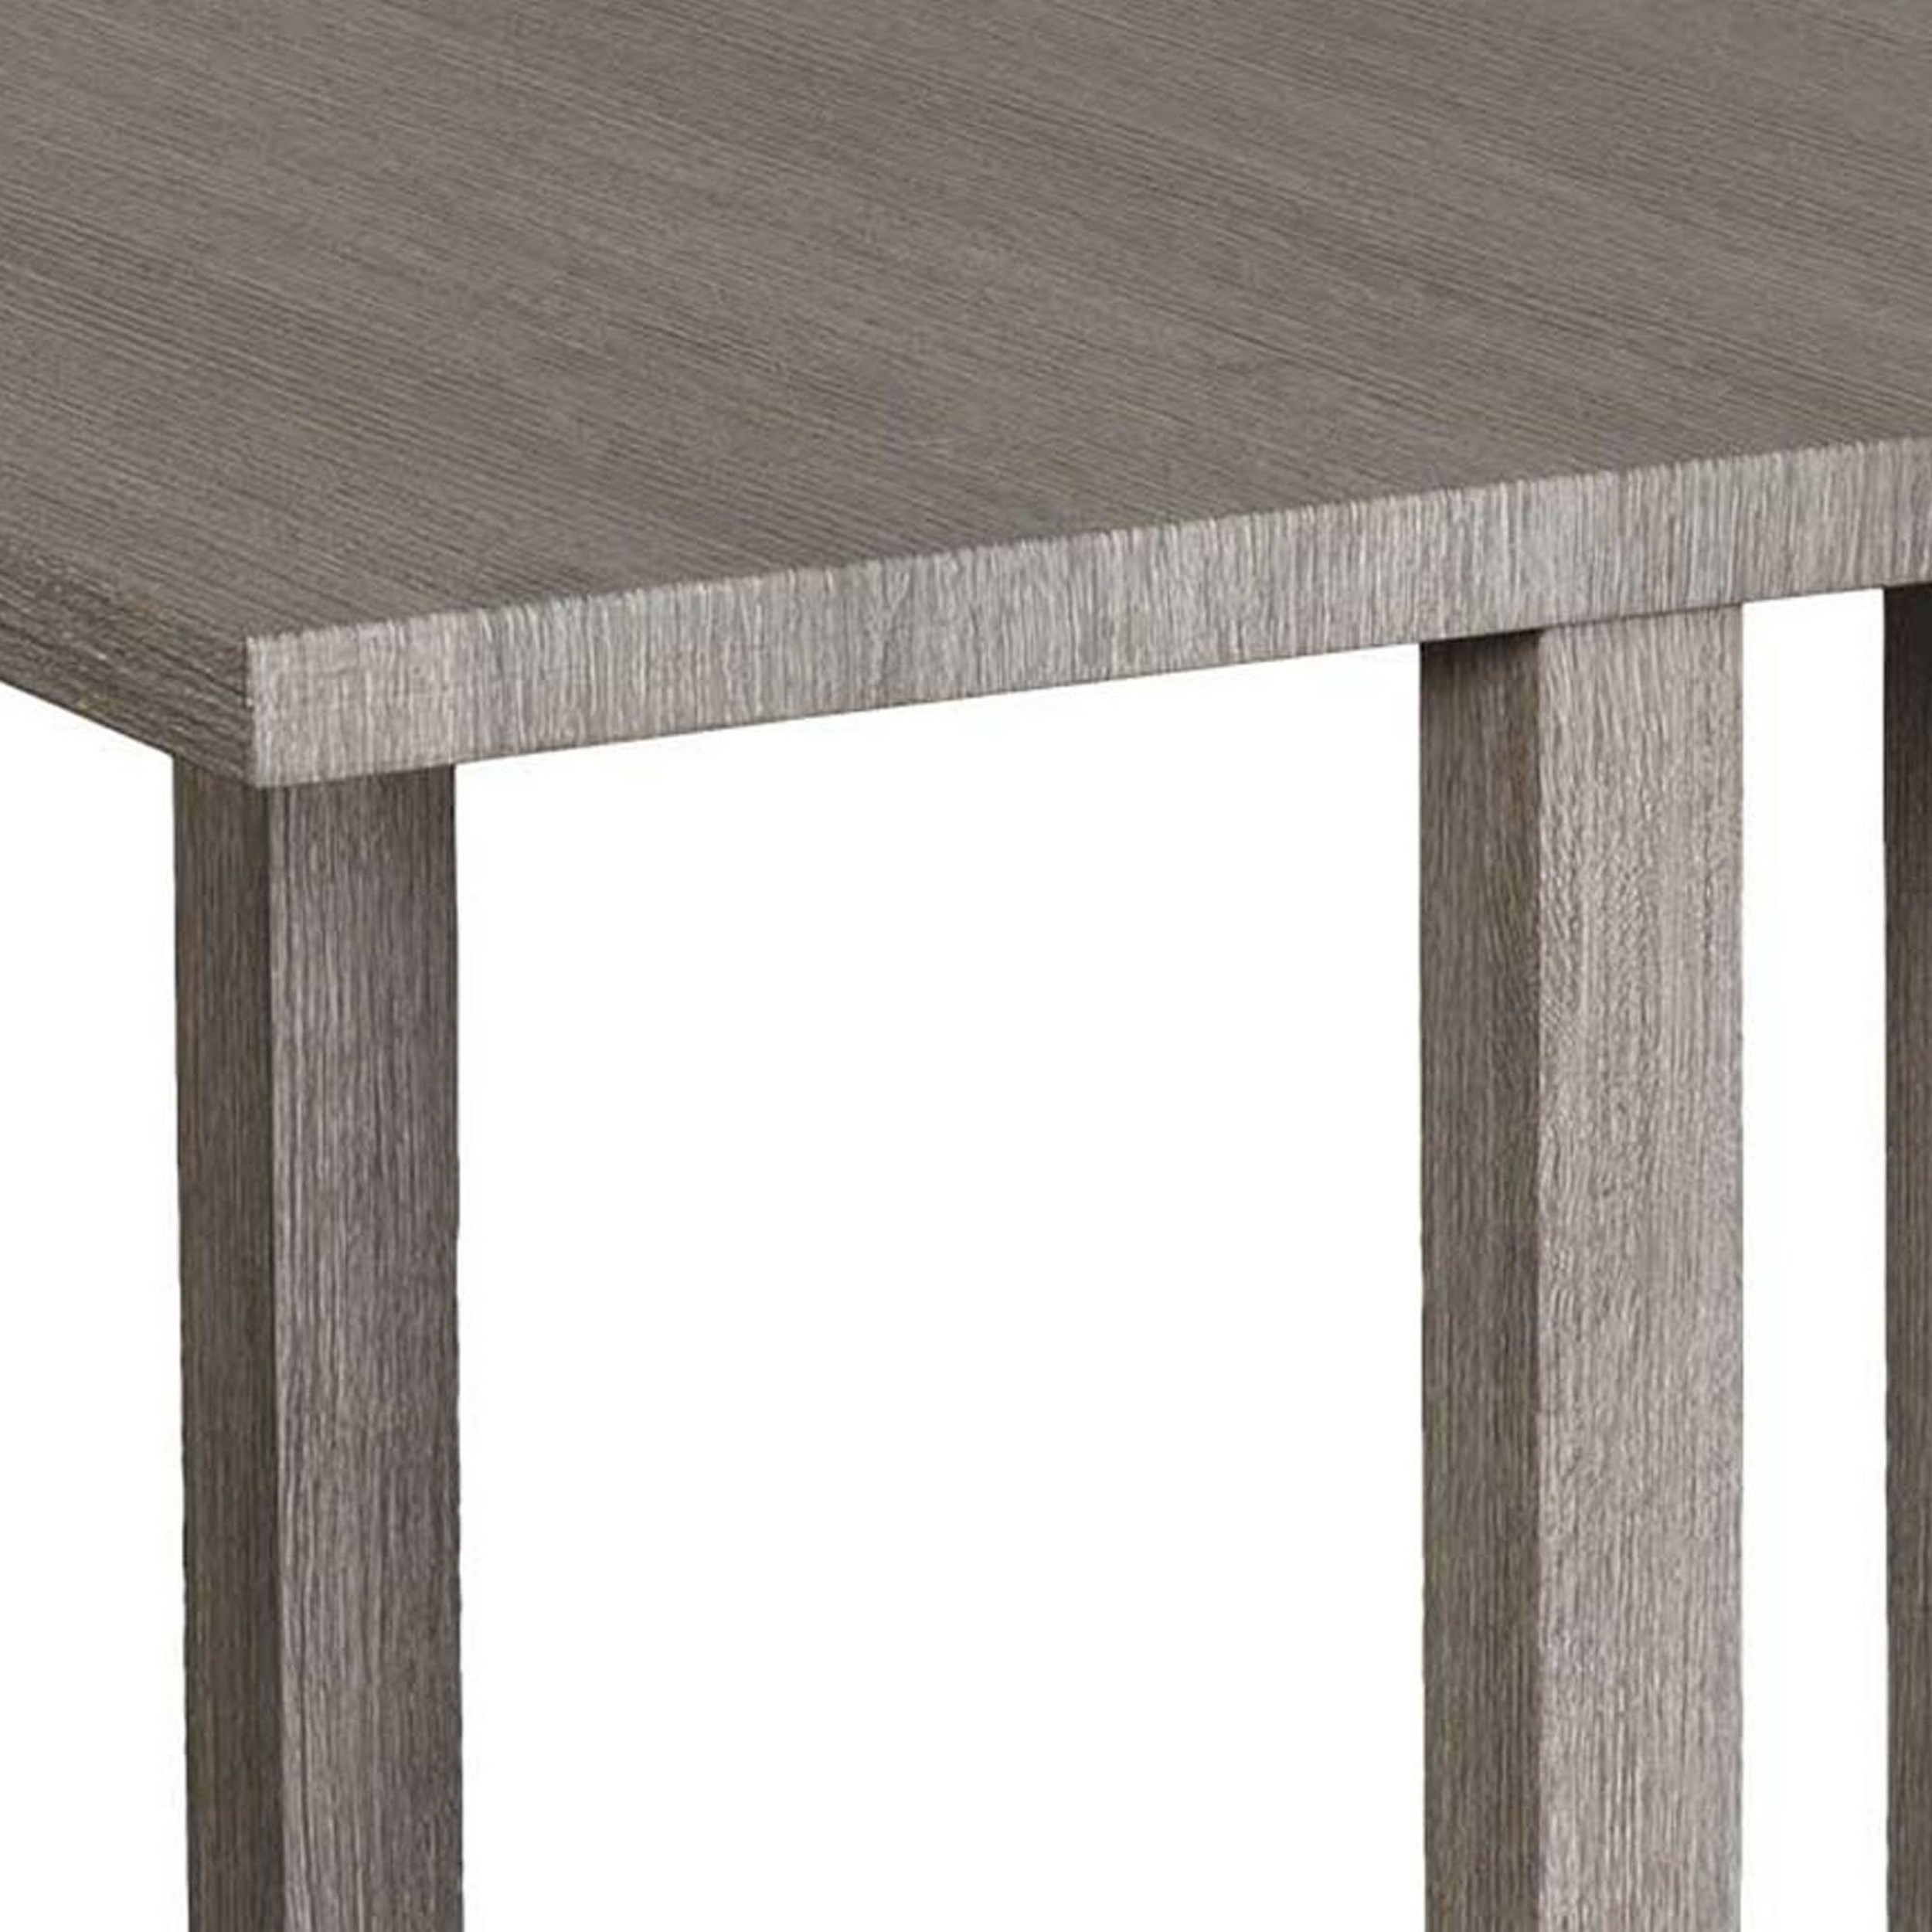 24 Inch Side End Table, Square Top, Sturdy Crossed Base, Light Gray Wood- Saltoro Sherpi